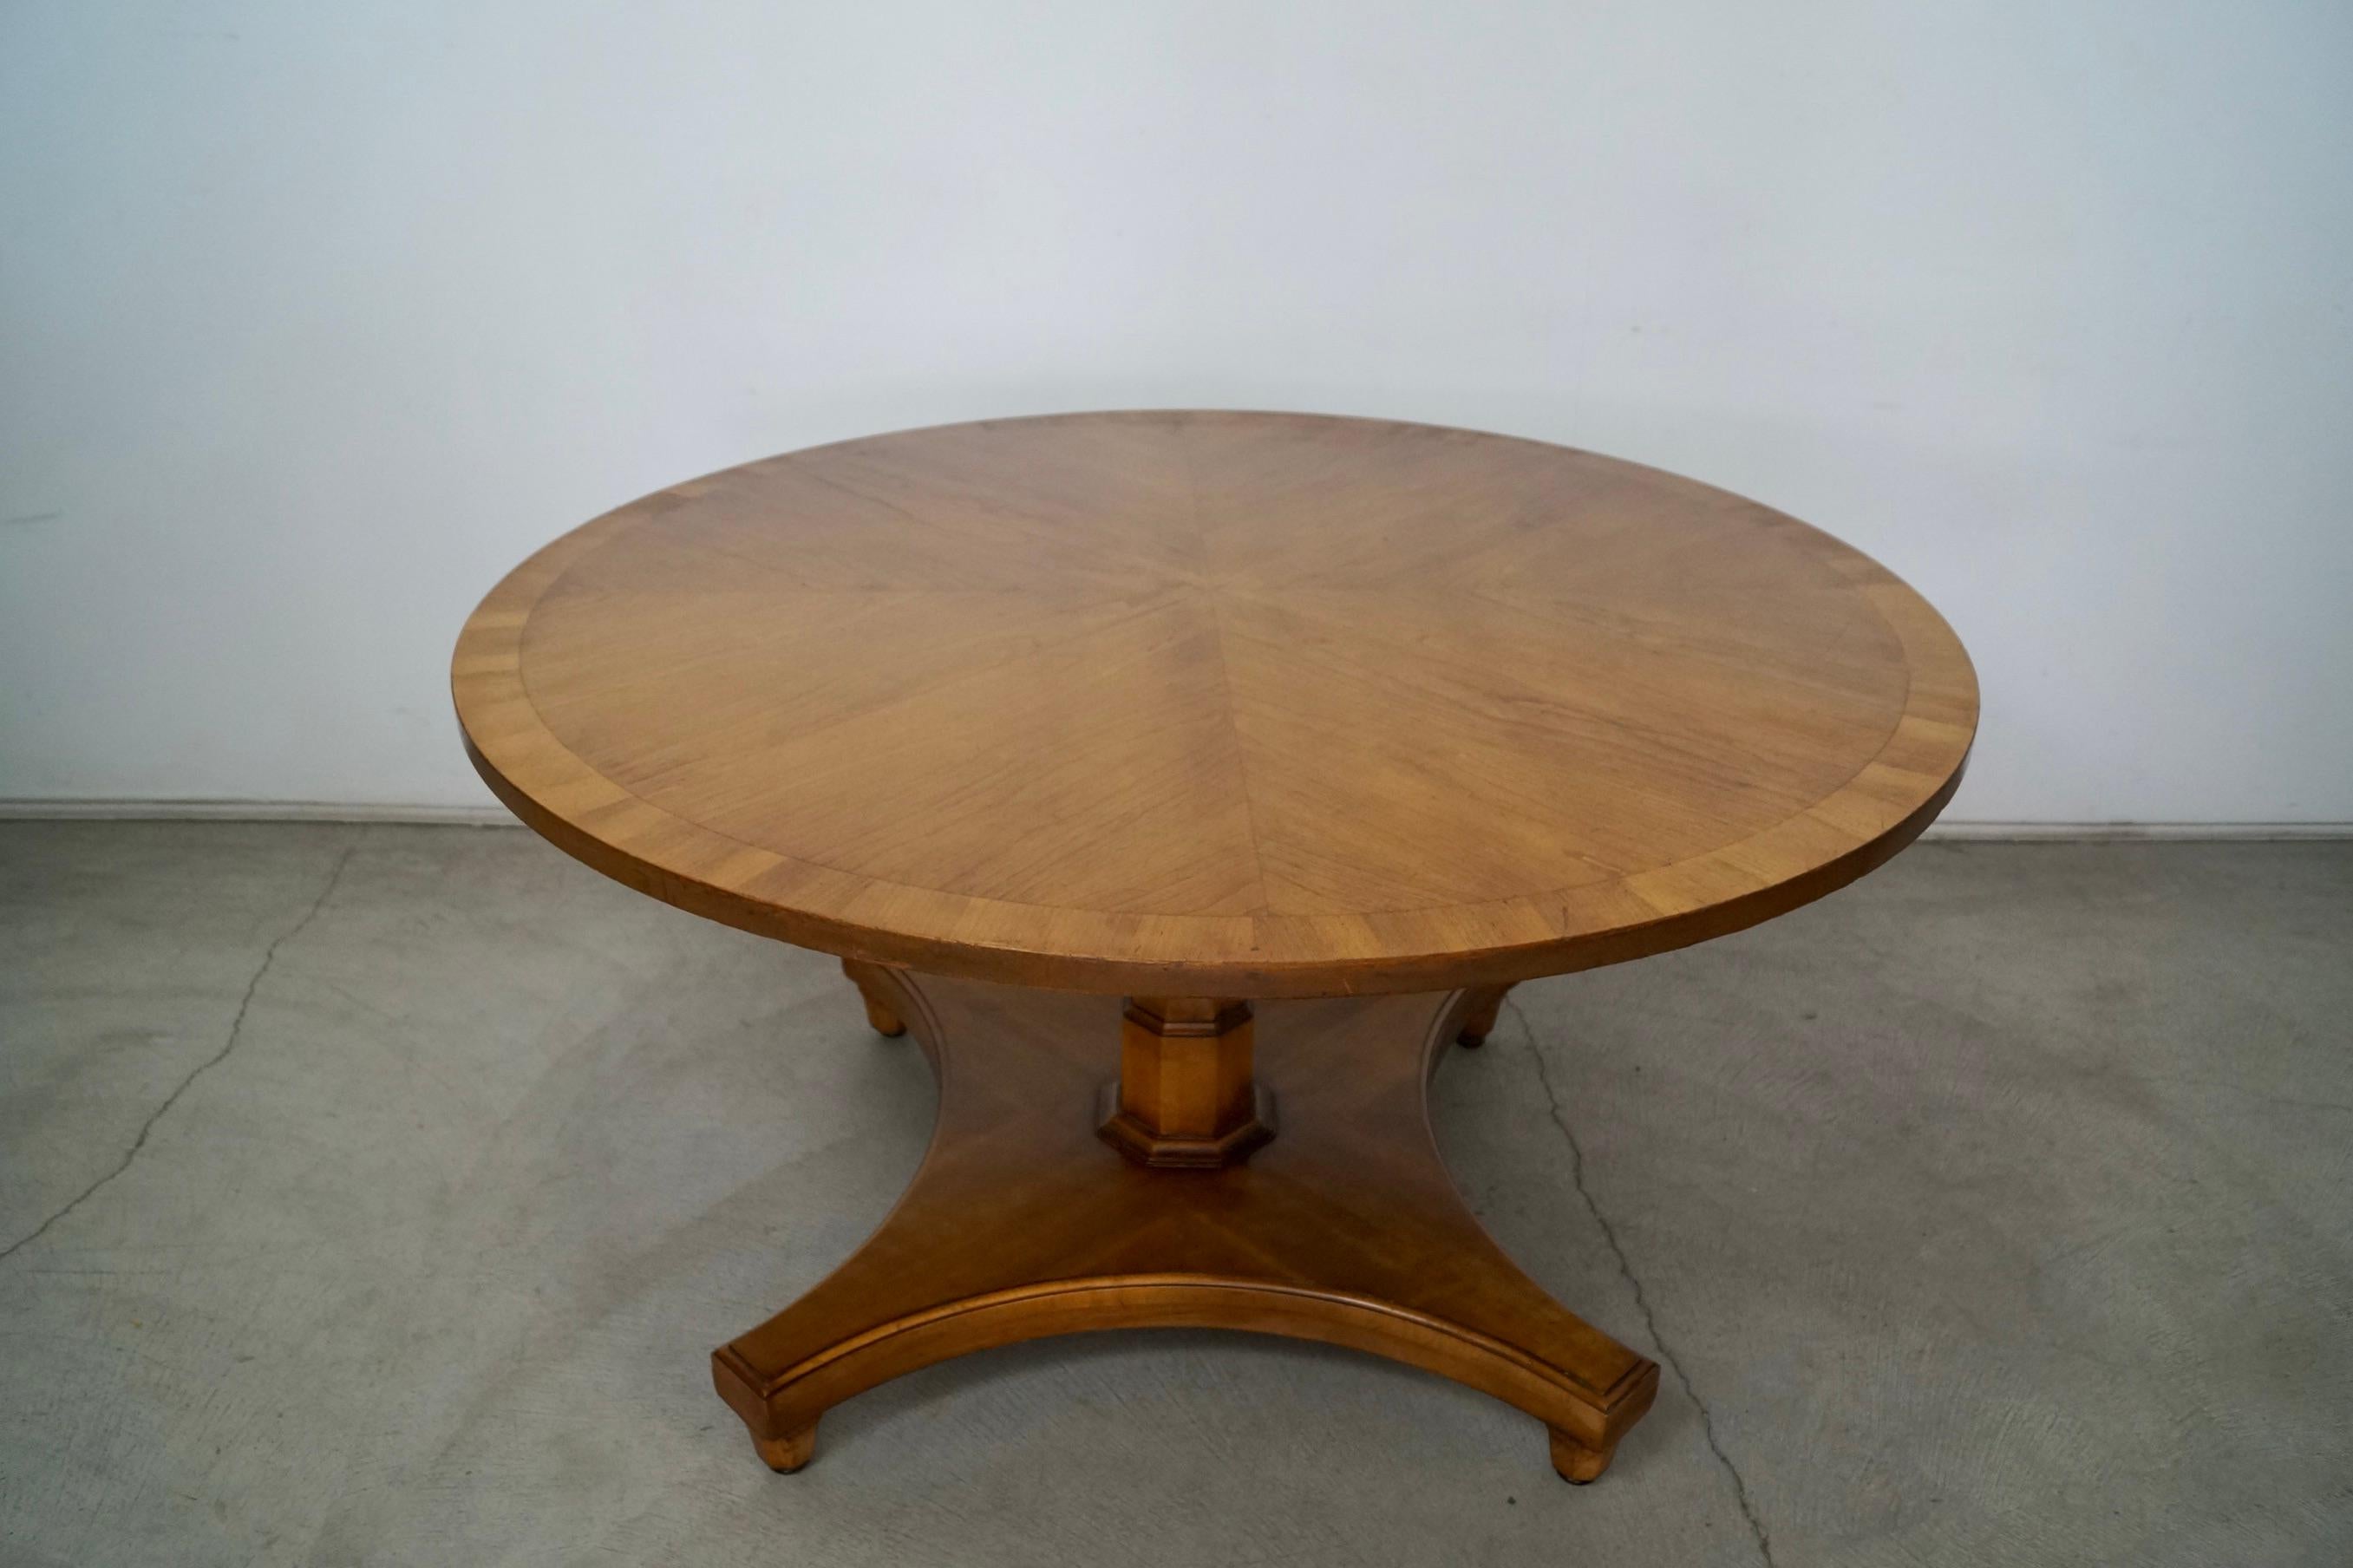 Vintage 1960's Mid century dining table for sale. Manufactured by Drexel in 1960, and part of the Palazzo collection. Made of gorgeous cherry wood, and has a walnut finish to it. It's in good vintage condition with some soft visual wear to it. Can